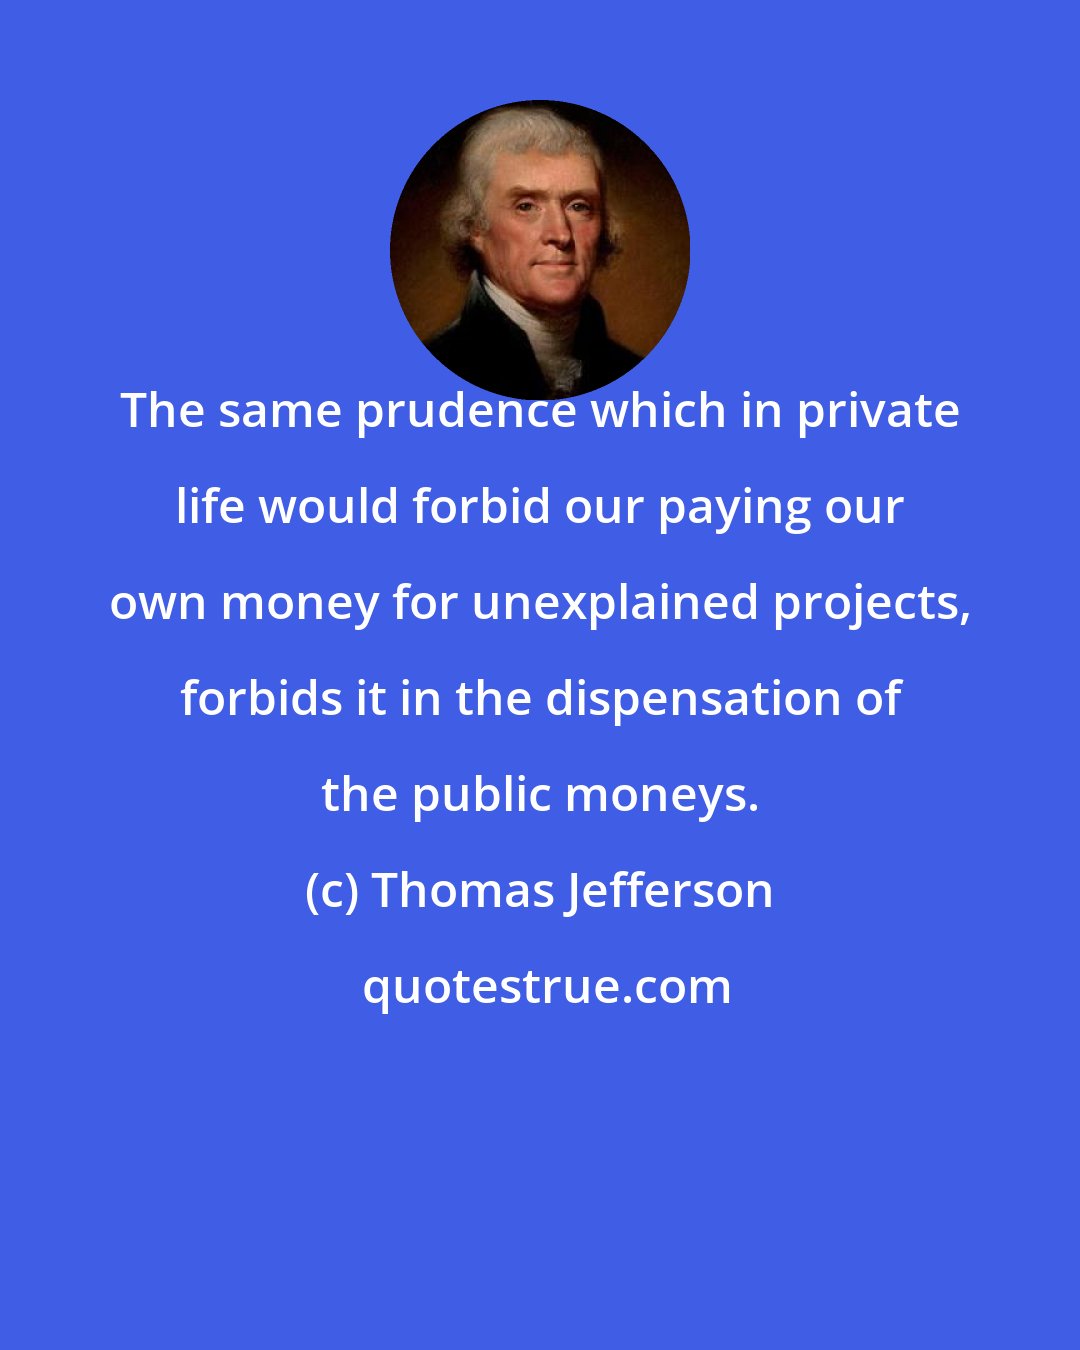 Thomas Jefferson: The same prudence which in private life would forbid our paying our own money for unexplained projects, forbids it in the dispensation of the public moneys.